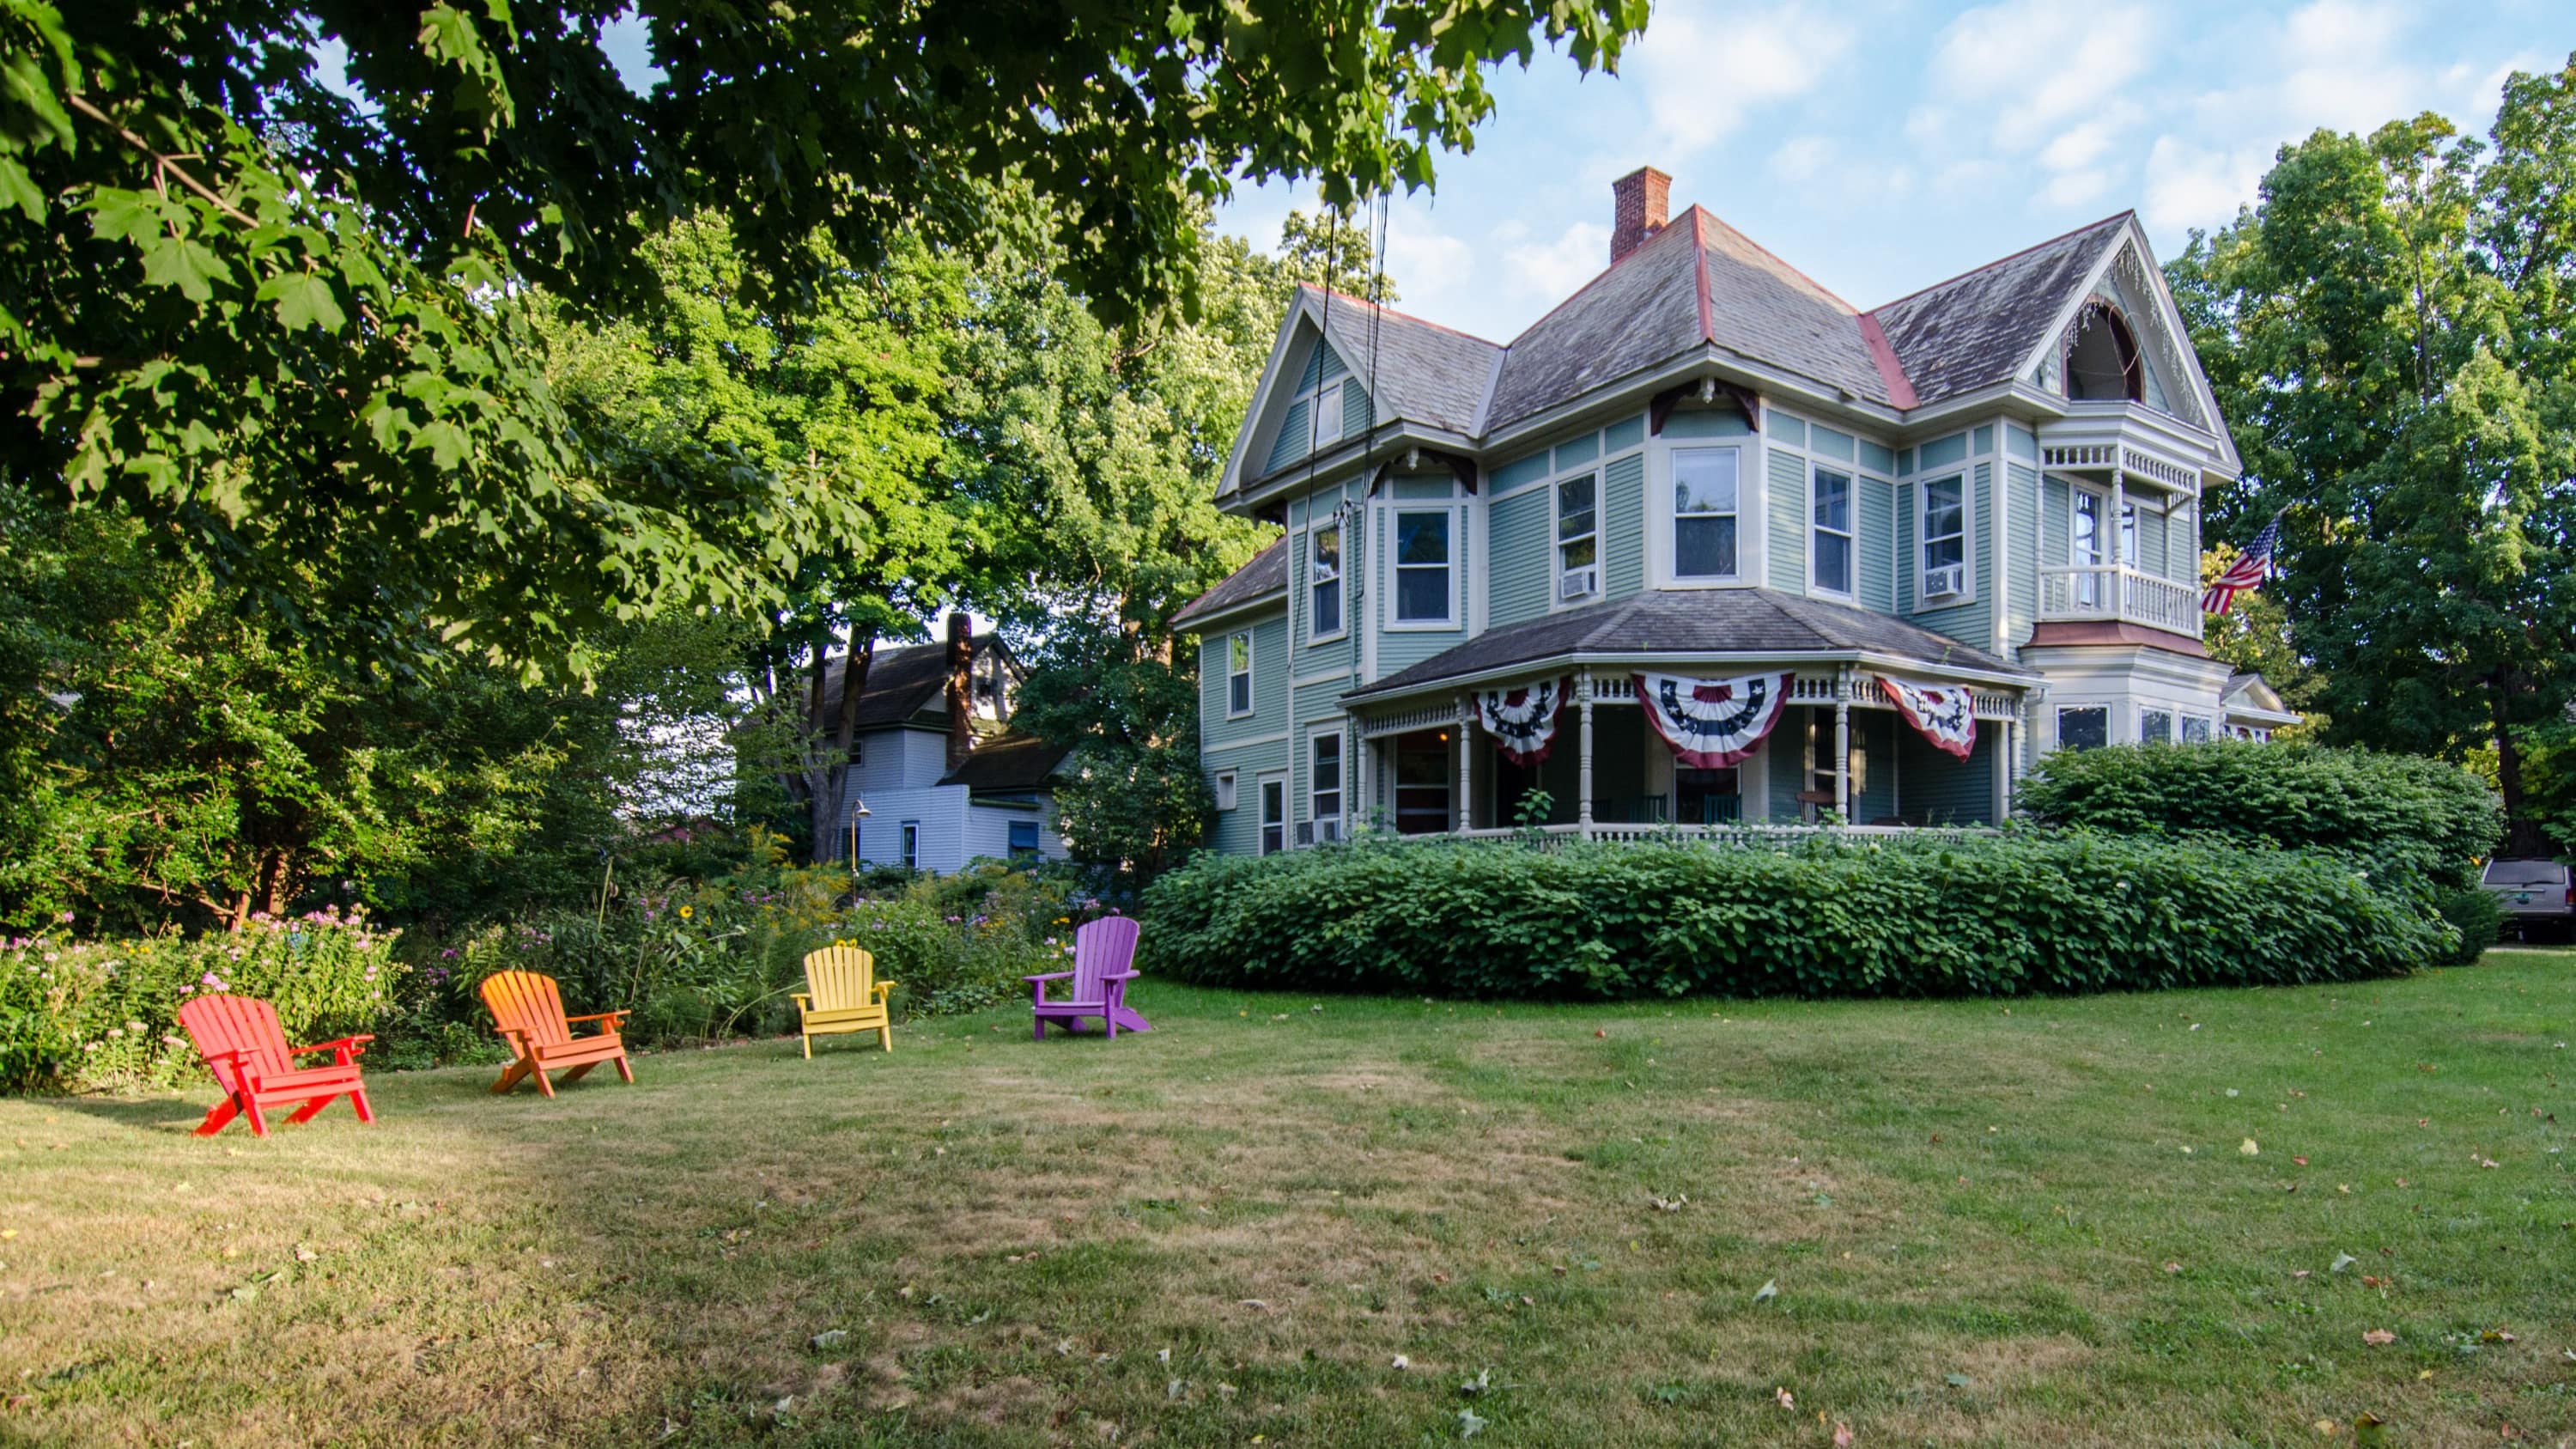 What’s so great about bed and breakfasts in Burlington, VT?